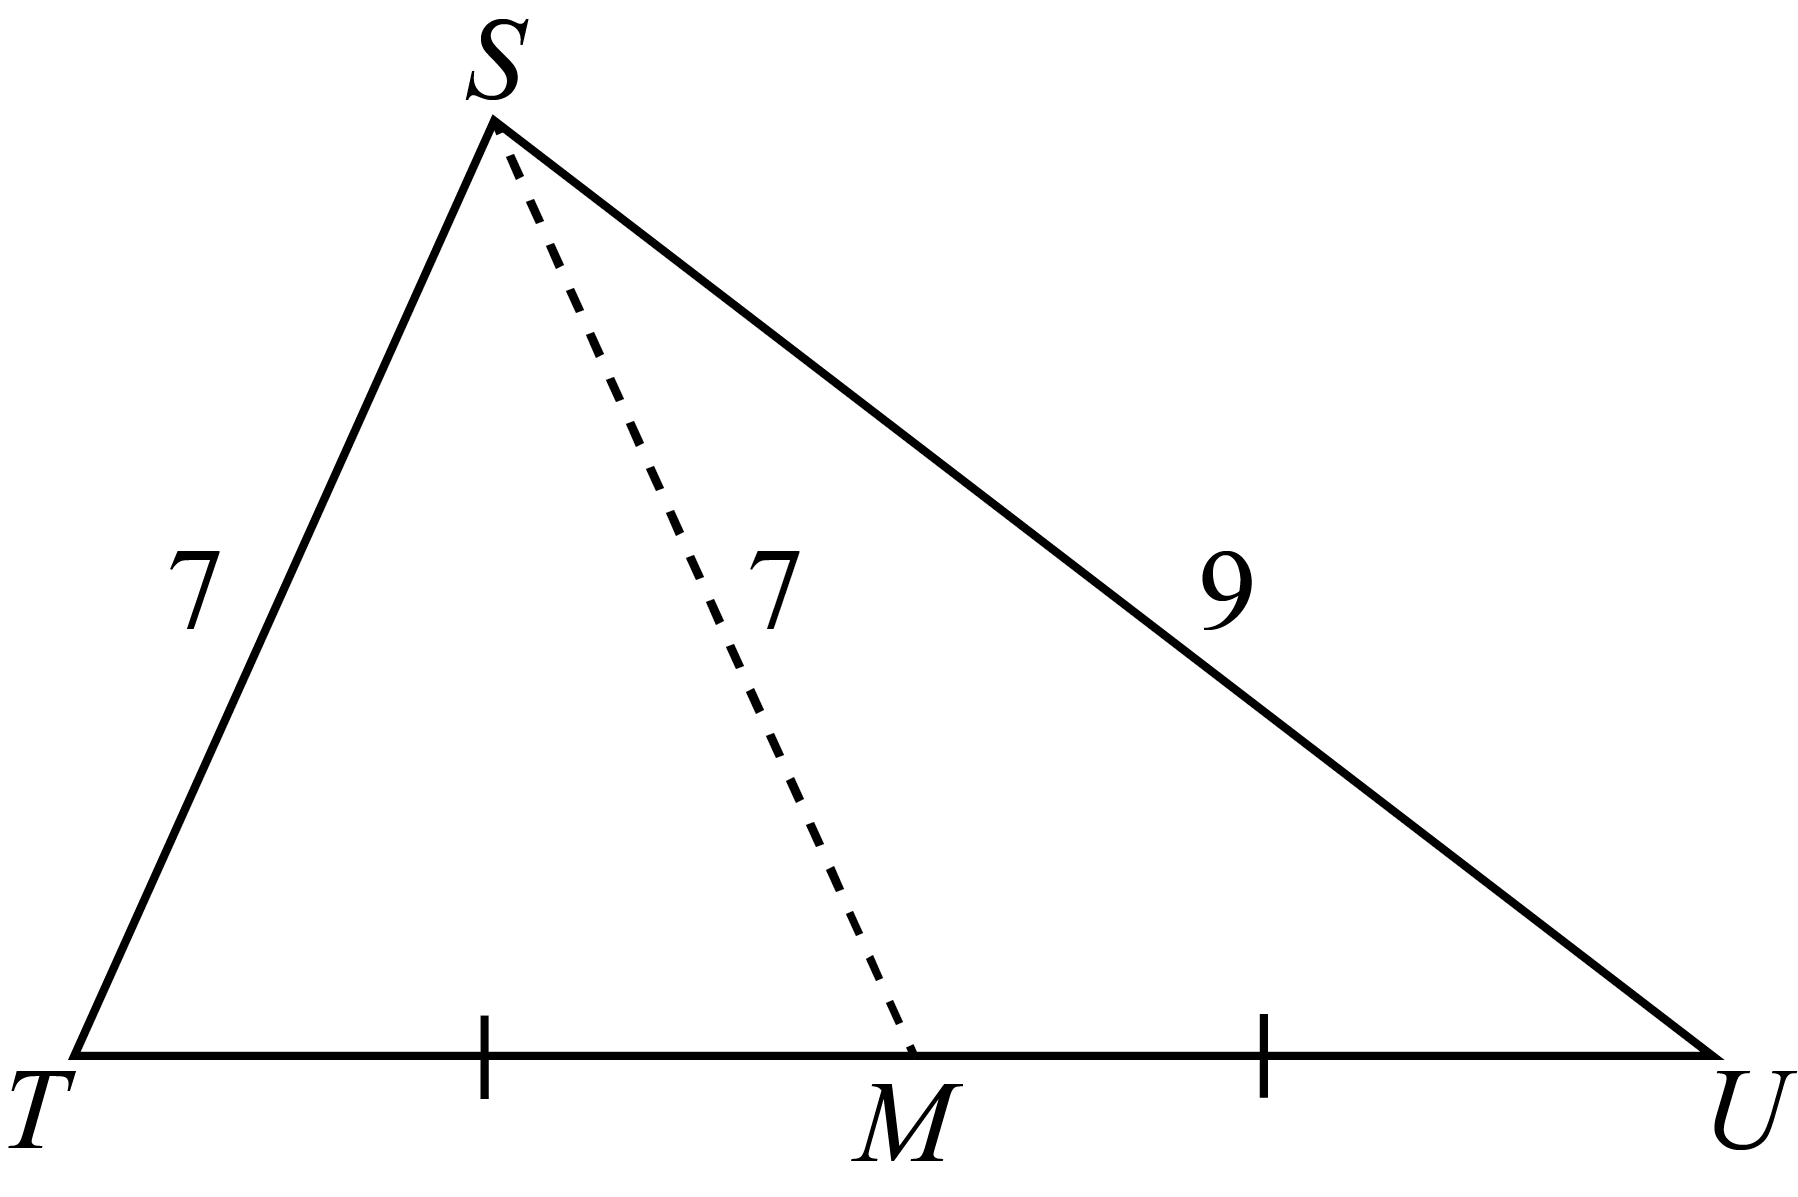 In triangle STU, point M divides TU into two equal segments, TM and MU. Vertex S is located above segment TM. 